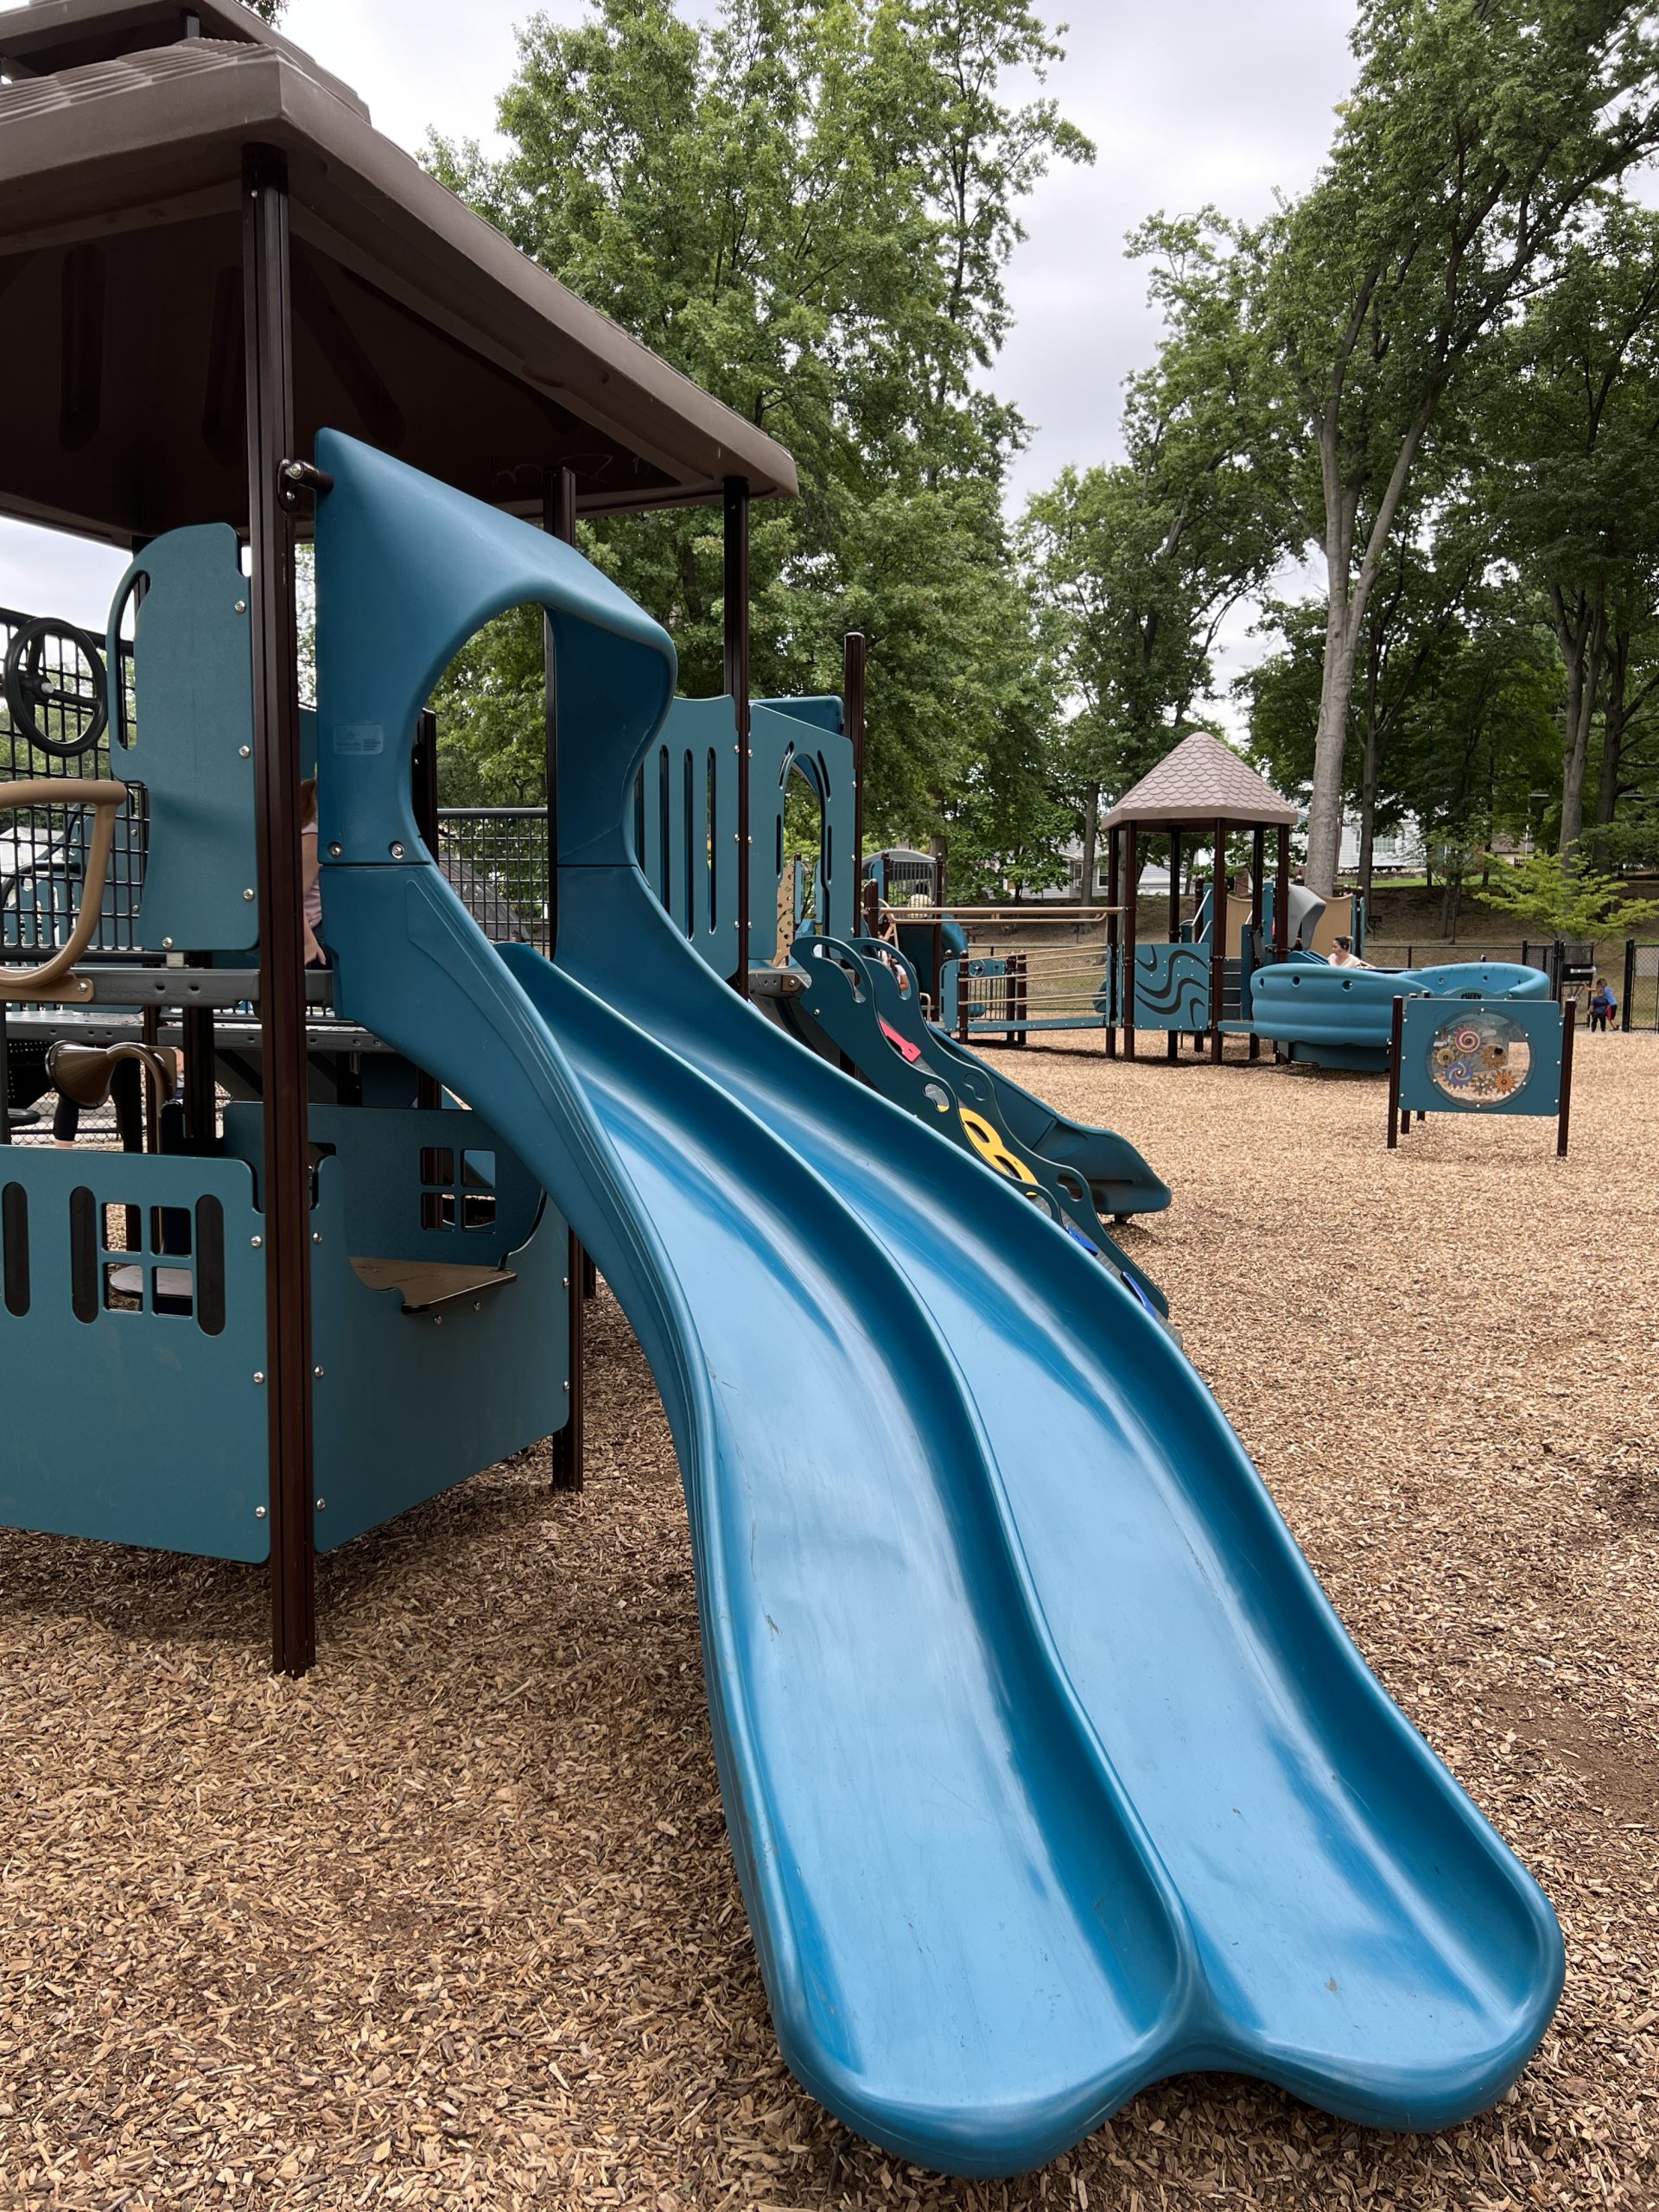 Goffle Brook Park Playground in Hawthorne NJ (with Photos)